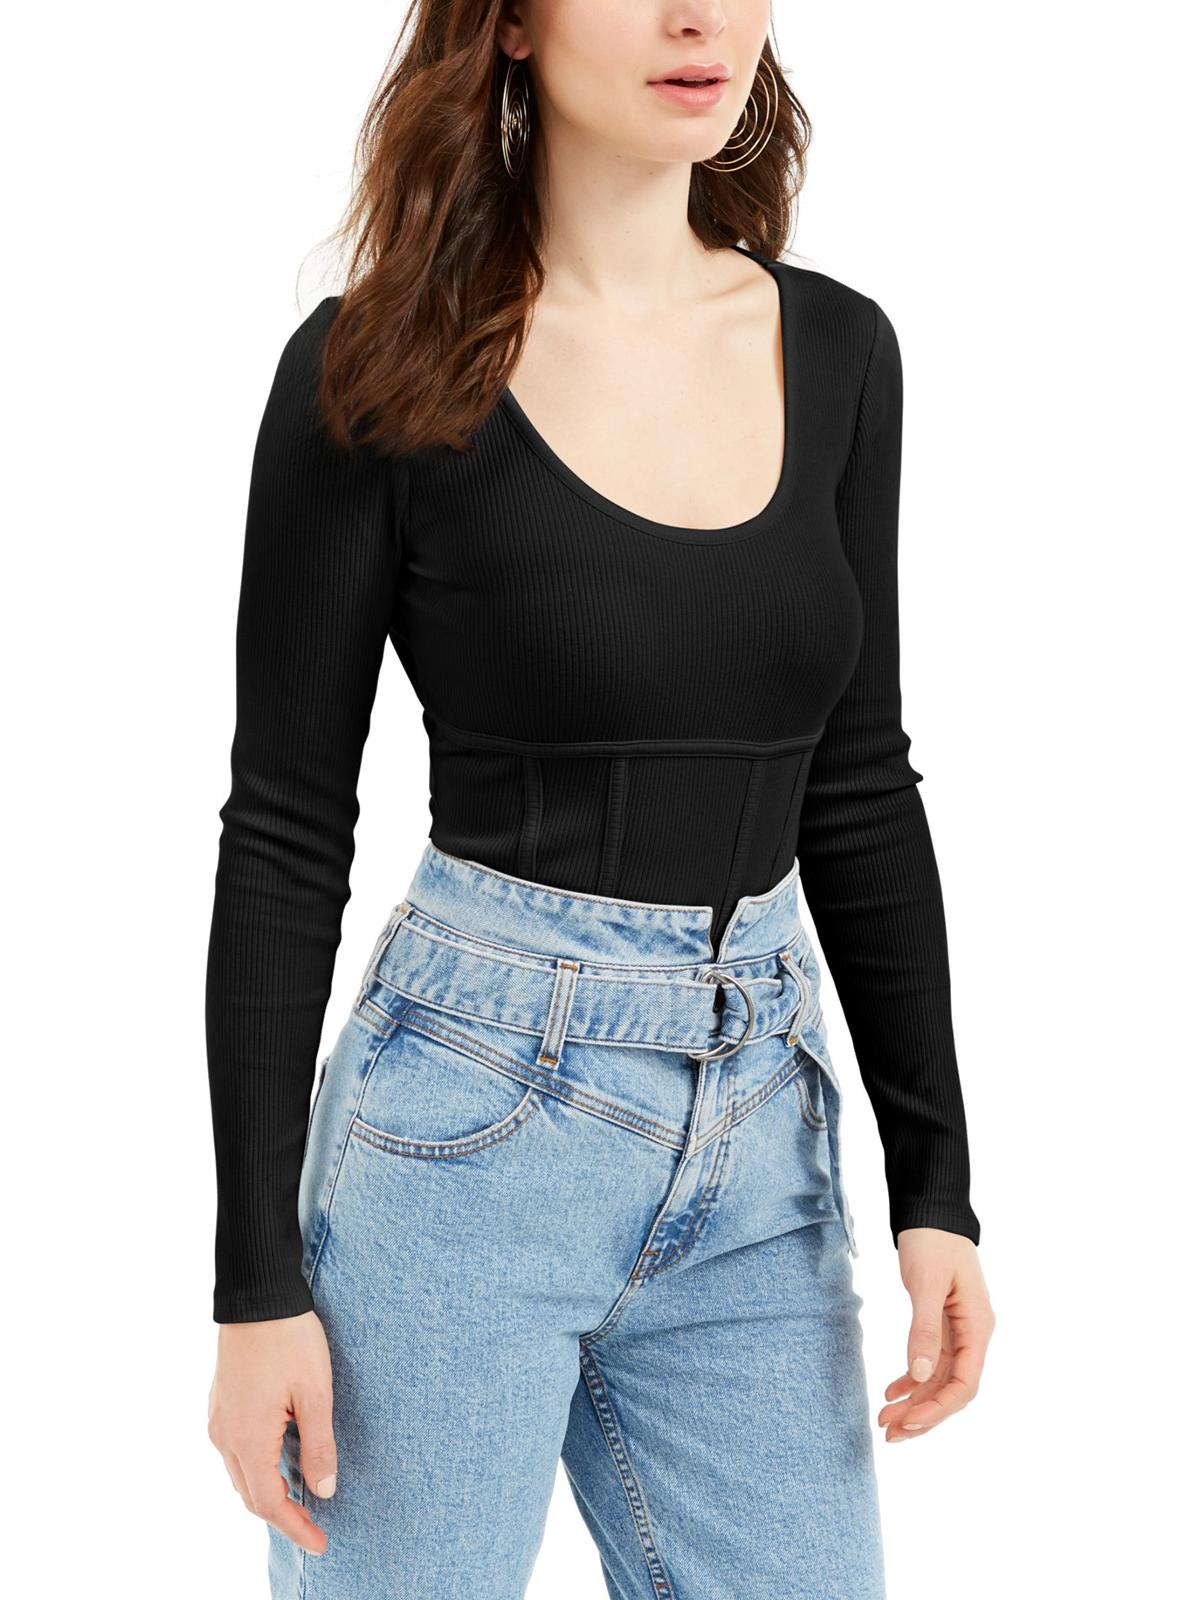 Guess Womens Charlie Ribbed Scoop Neck Top Black L - image 2 of 2